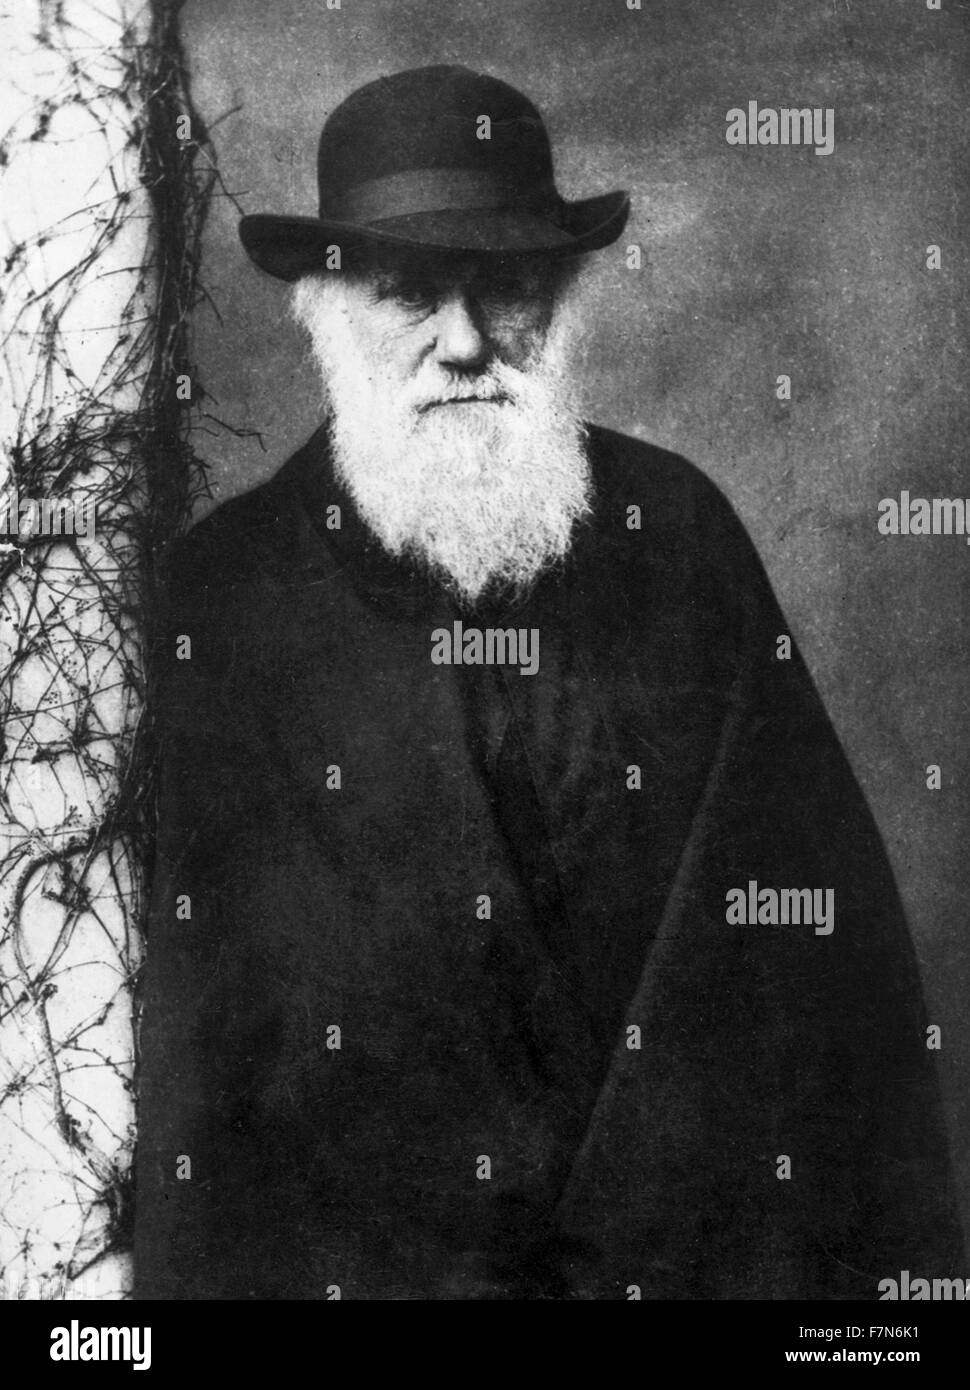 Charles Darwin (1809-1882) by Julia Margaret Cameron, was an English naturalist and geologist, best known for his contributions to evolutionary theory. Stock Photo